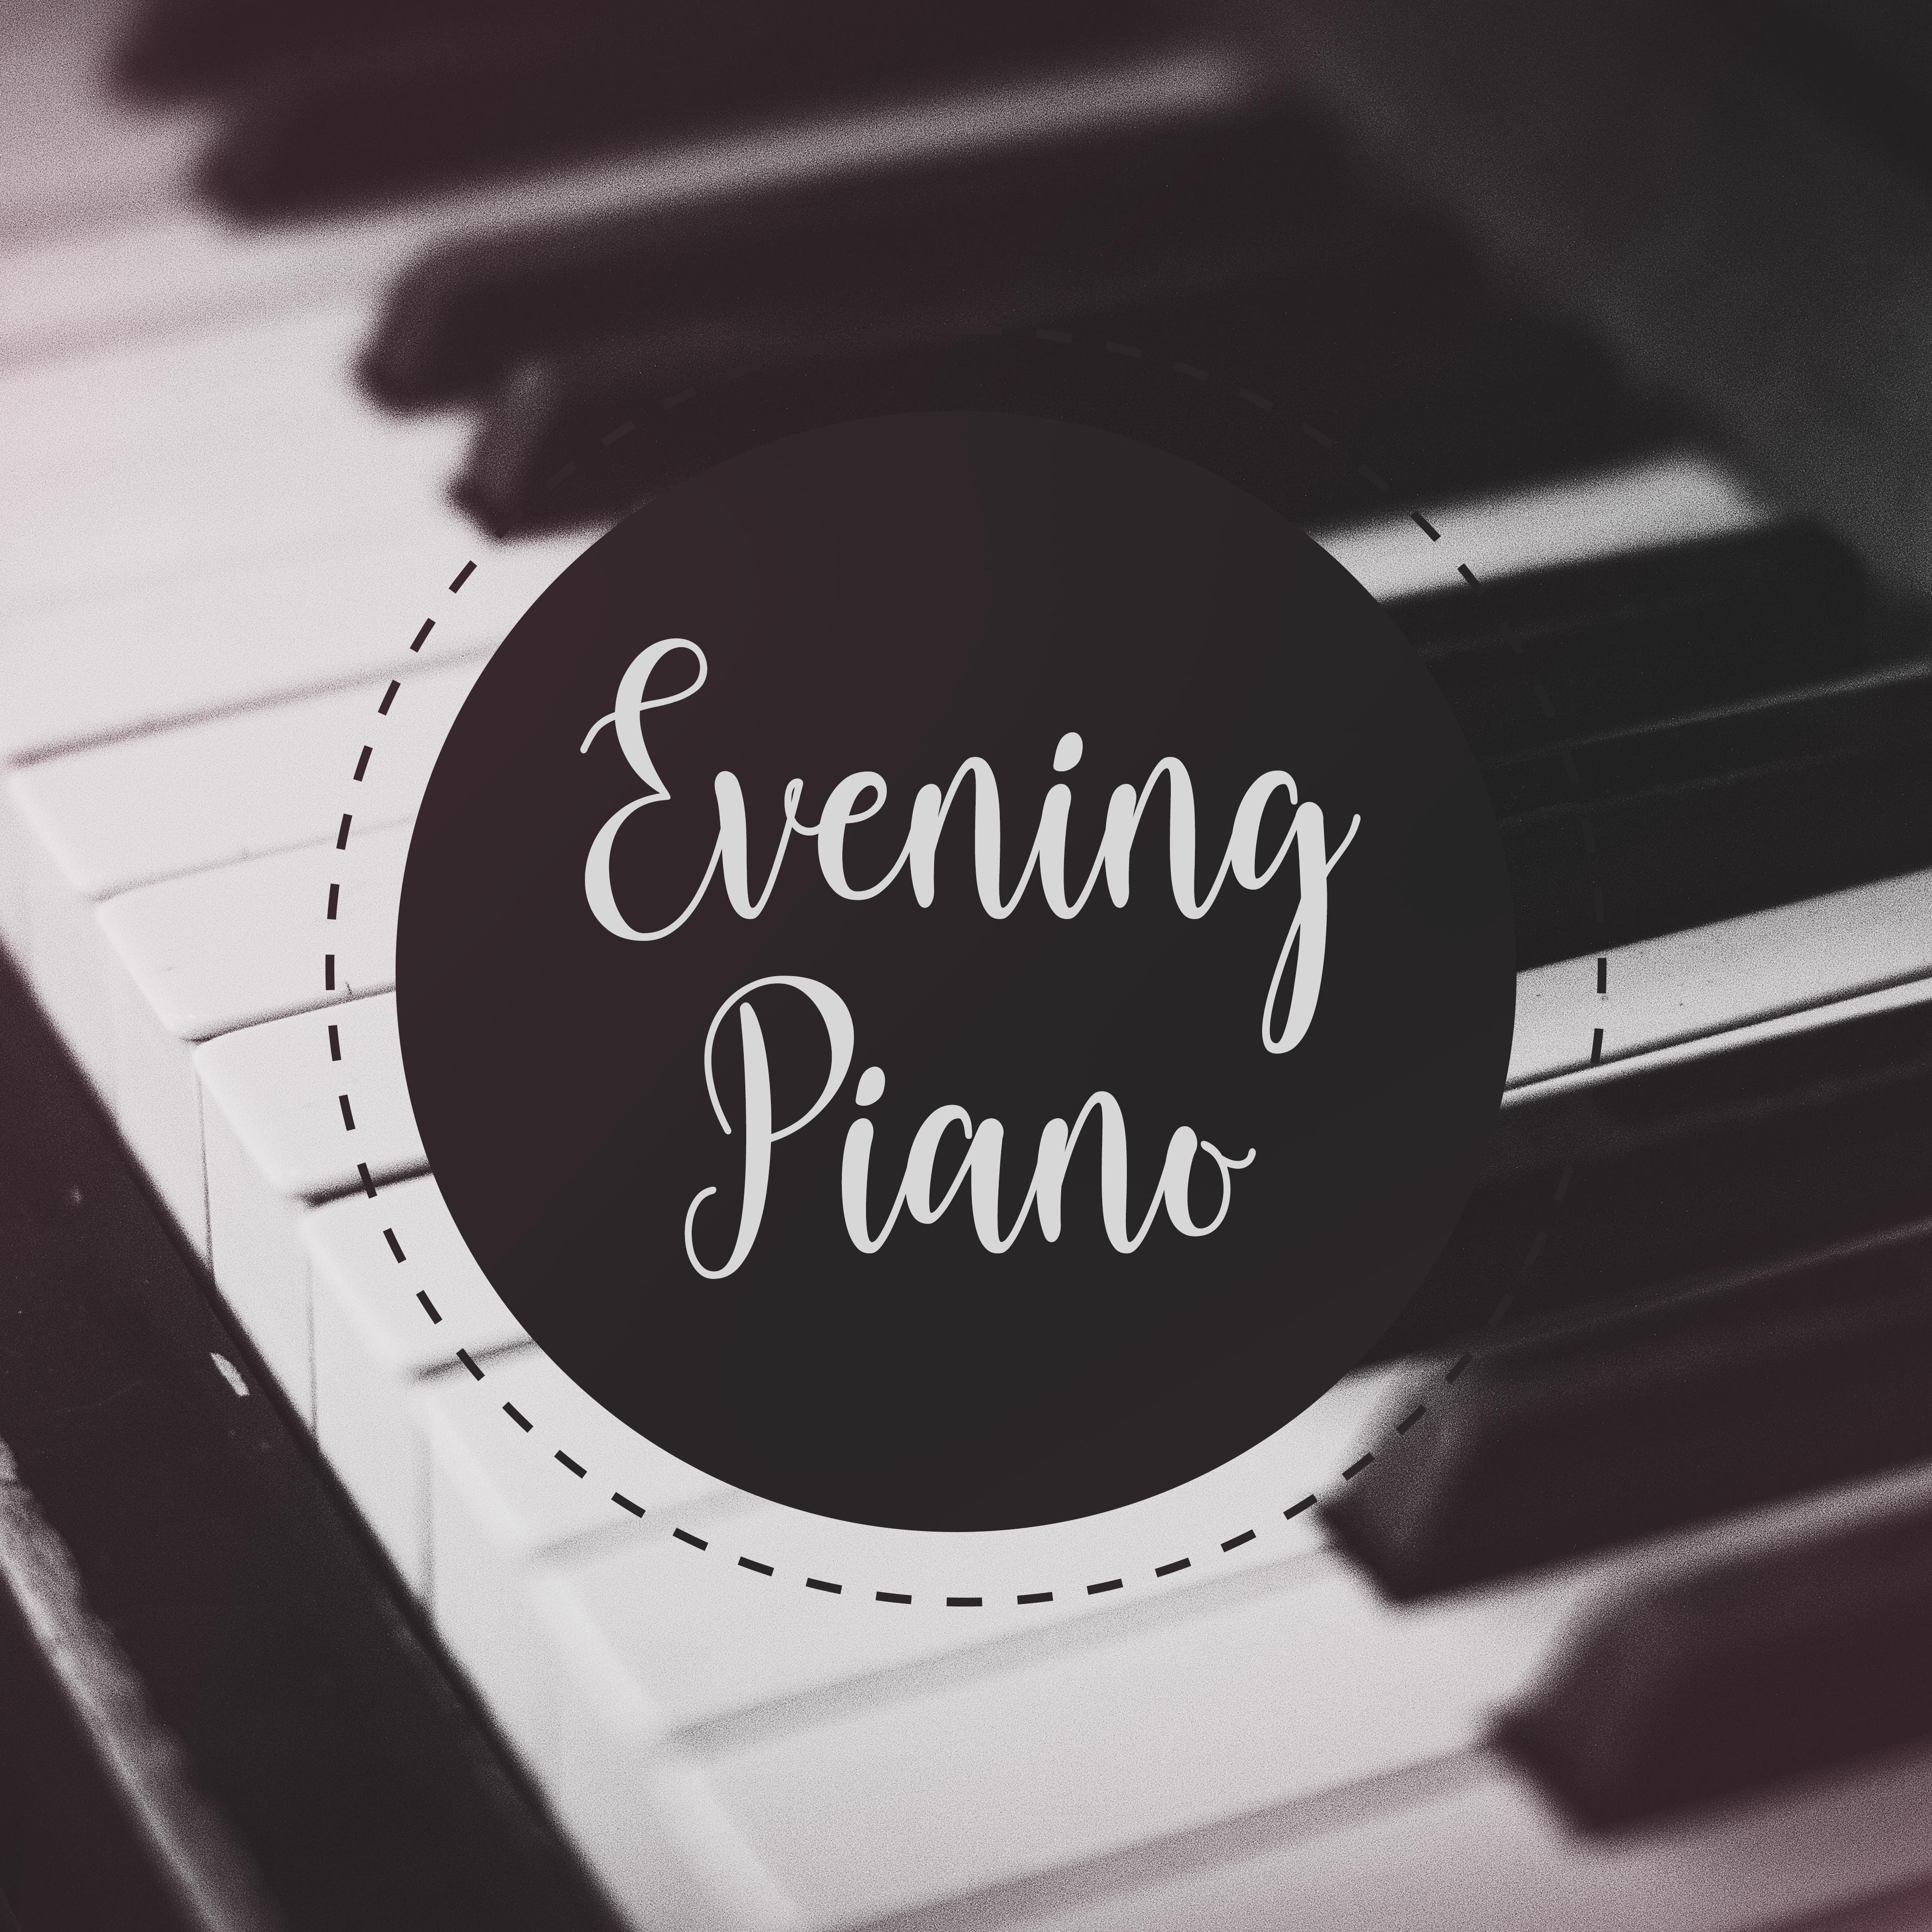 Evening Piano - Soothing Music for Evening Relaxation, Rest after a Full Day of Work with a Glass of Wine and Relaxing Sounds of the Piano